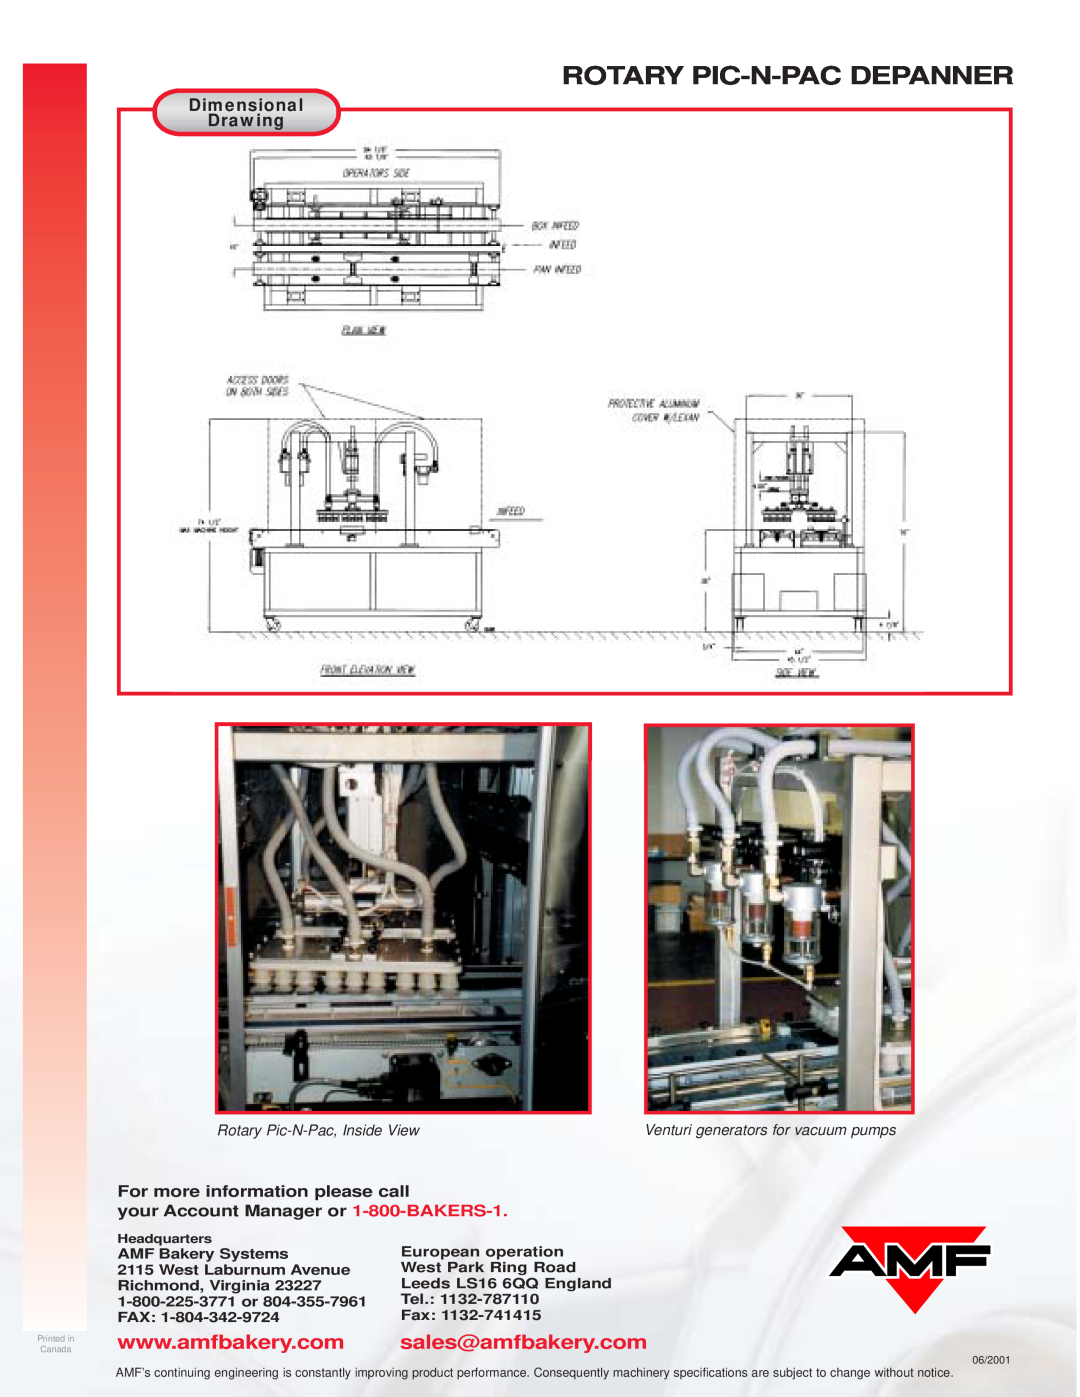 AMF Rotary Pic-N-Pac Depanner manual sales@amfbakery.com, Dimensional Drawing, Rotary Pic-N-Pacdepanner 